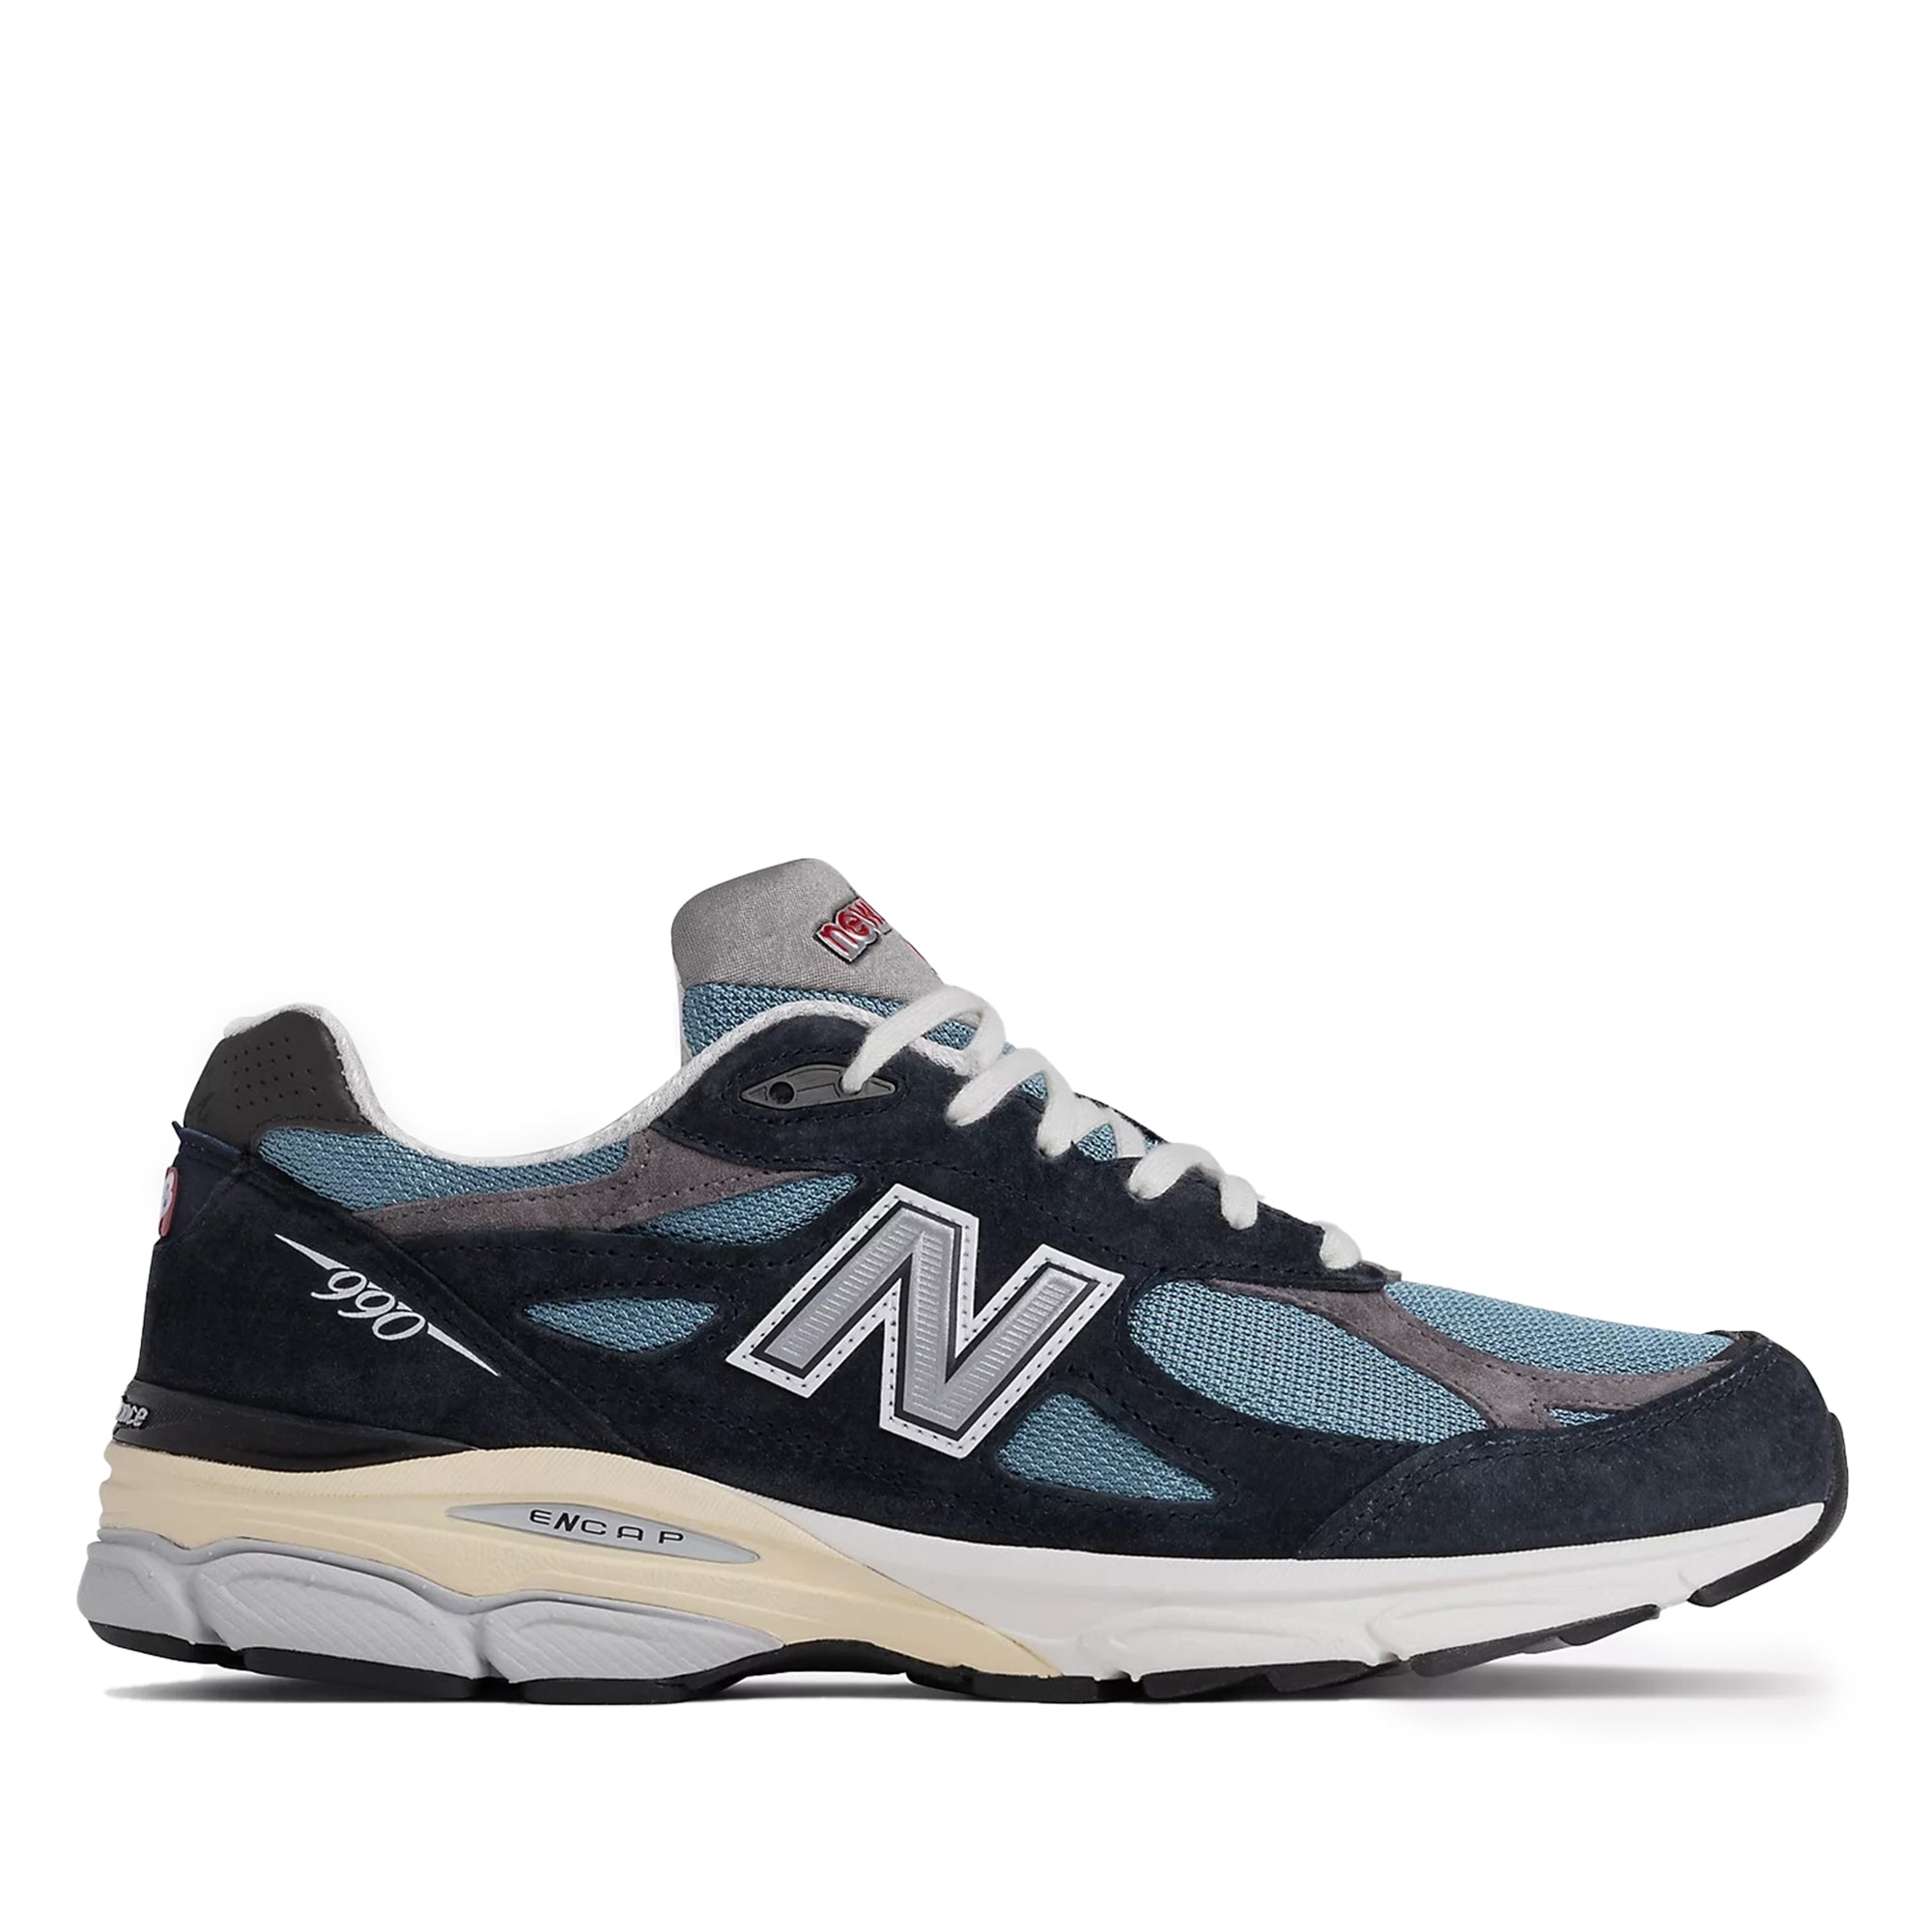 New Balance: Made in USA 990v3 Sneakers (Navy/Blue) | DSMNY E-SHOP